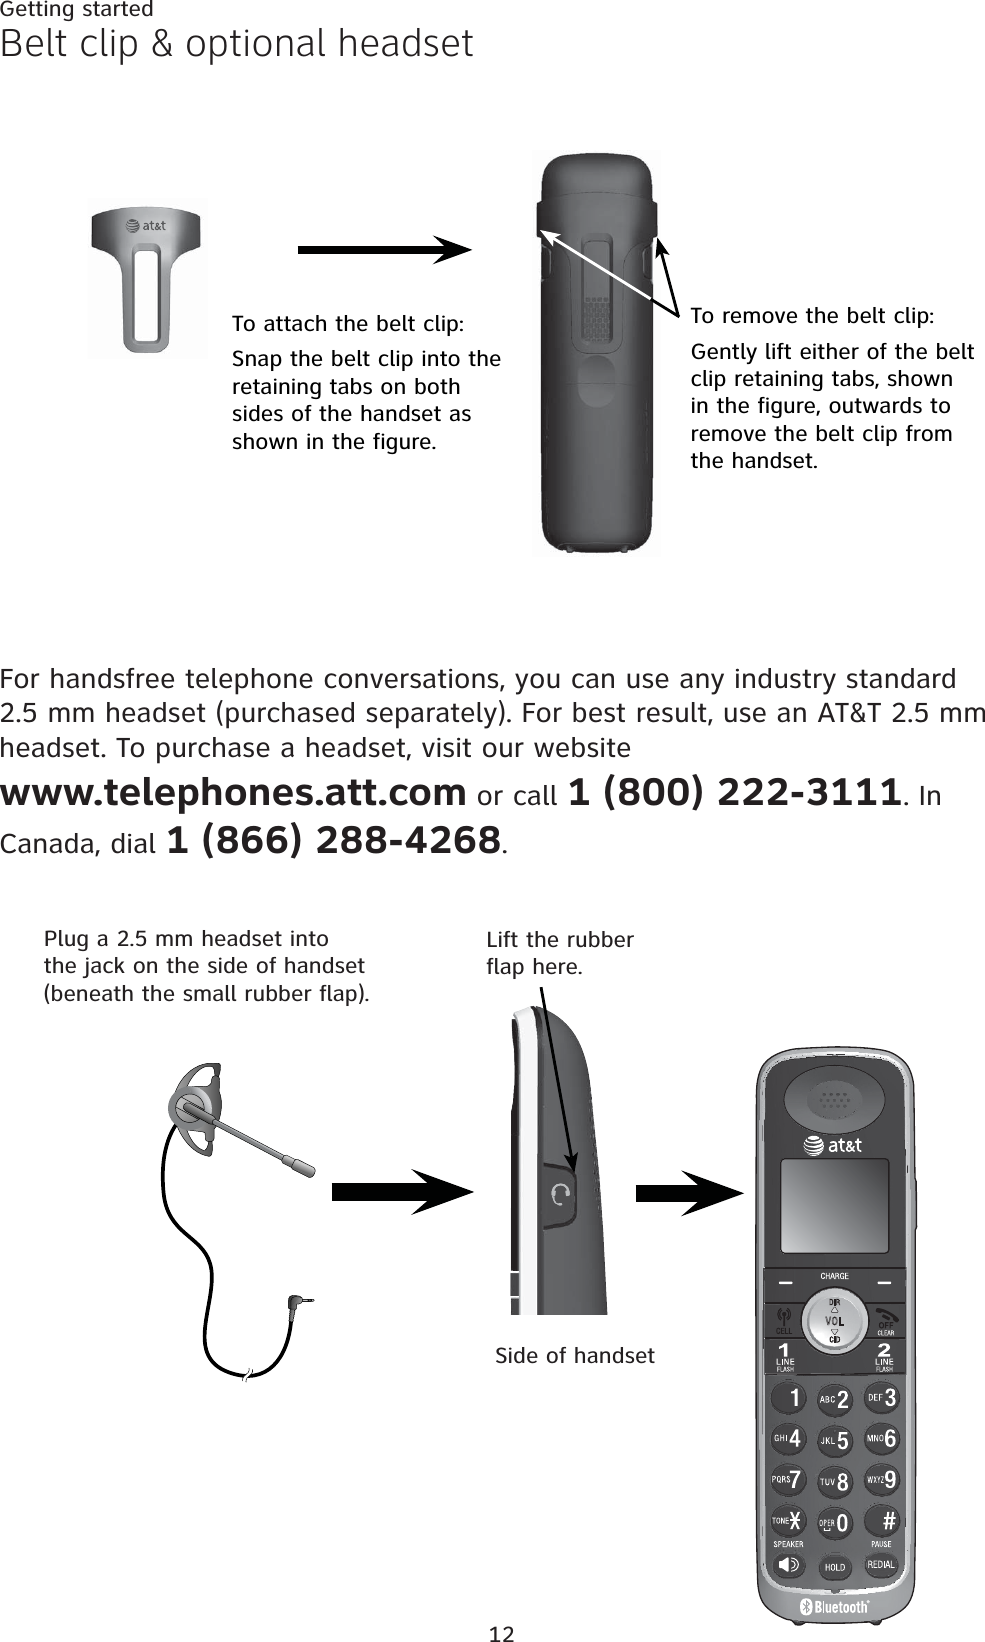 12Getting startedBelt clip &amp; optional headsetFor handsfree telephone conversations, you can use any industry standard 2.5 mm headset (purchased separately). For best result, use an AT&amp;T 2.5 mm headset. To purchase a headset, visit our website www.telephones.att.com or call 1 (800) 222-3111. In Canada, dial 1 (866) 288-4268.Plug a 2.5 mm headset into the jack on the side of handset (beneath the small rubber flap).Lift the rubber flap here.Side of handsetTo attach the belt clip:Snap the belt clip into the retaining tabs on both sides of the handset as shown in the figure.To remove the belt clip:Gently lift either of the belt clip retaining tabs, shown in the figure, outwards to remove the belt clip from the handset.